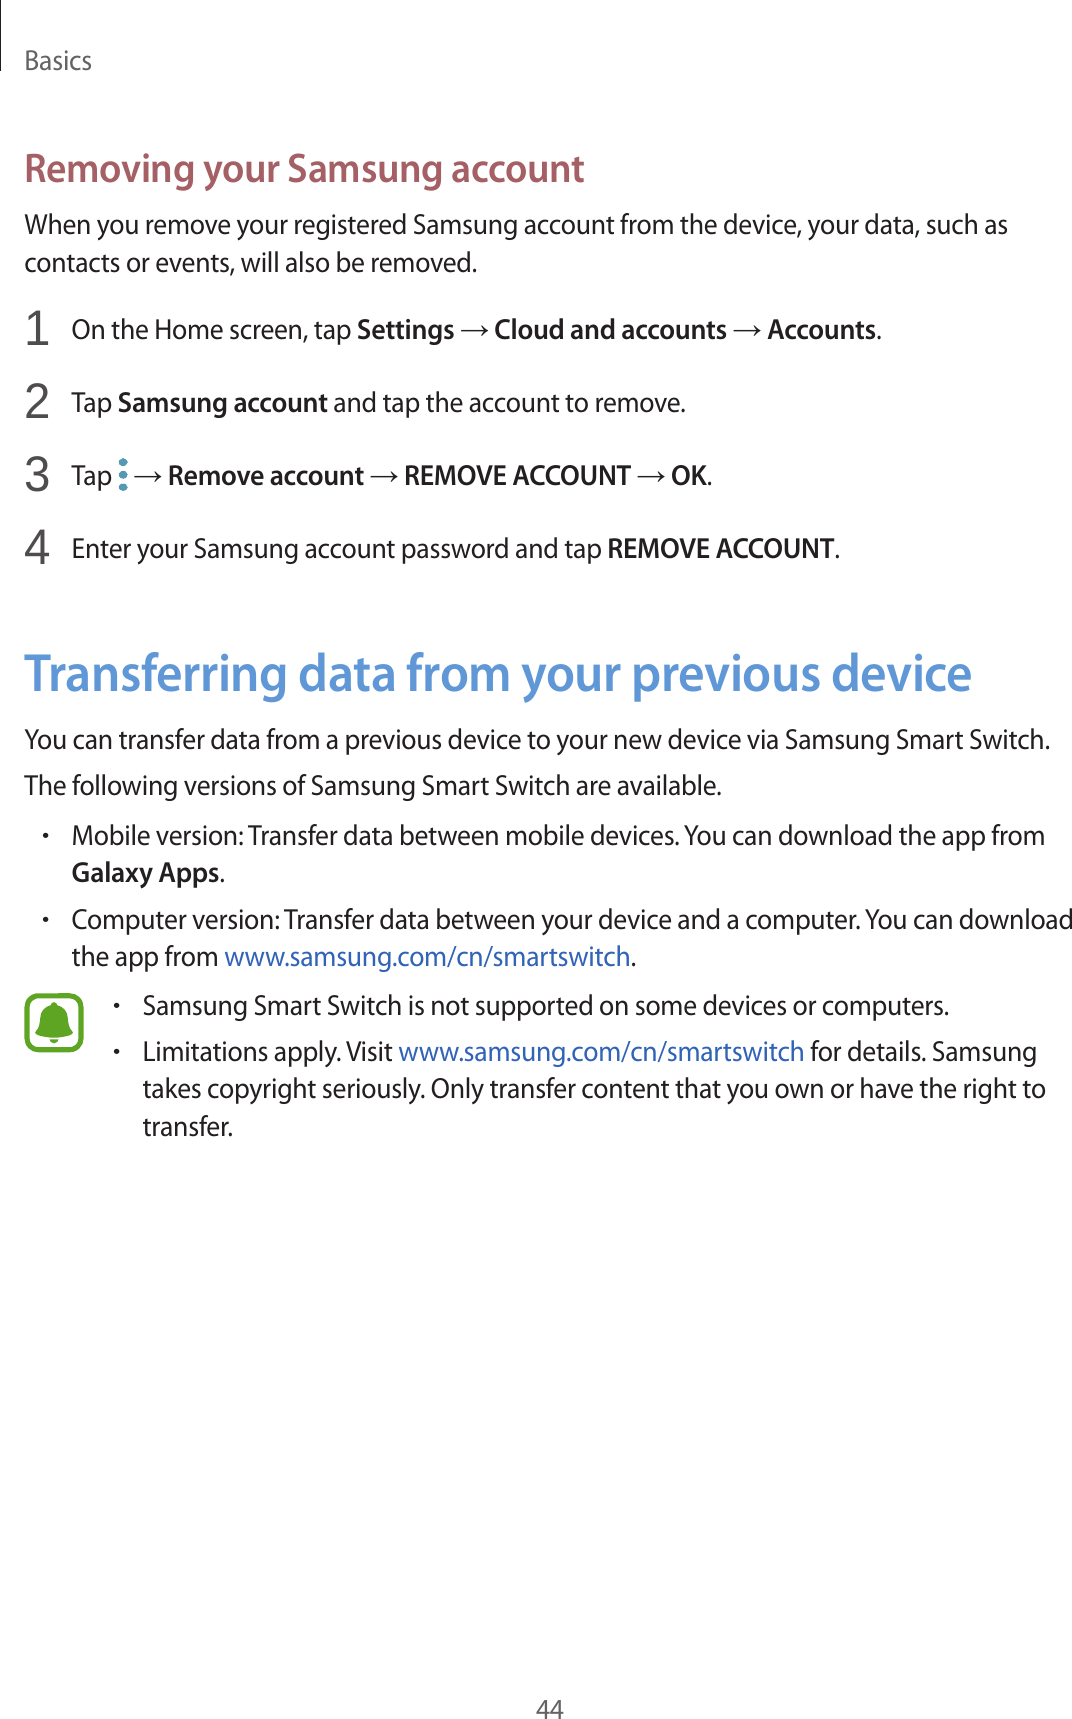 Basics44Removing your Samsung accountWhen you remove your registered Samsung account from the device, your data, such as contacts or events, will also be removed.1  On the Home screen, tap Settings → Cloud and accounts → Accounts.2  Tap Samsung account and tap the account to remove.3  Tap   → Remove account → REMOVE ACCOUNT → OK.4  Enter your Samsung account password and tap REMOVE ACCOUNT.Transferring data from your previous deviceYou can transfer data from a previous device to your new device via Samsung Smart Switch.The following versions of Samsung Smart Switch are available.•Mobile version: Transfer data between mobile devices. You can download the app from Galaxy Apps.•Computer version: Transfer data between your device and a computer. You can download the app from www.samsung.com/cn/smartswitch.•Samsung Smart Switch is not supported on some devices or computers.•Limitations apply. Visit www.samsung.com/cn/smartswitch for details. Samsung takes copyright seriously. Only transfer content that you own or have the right to transfer.